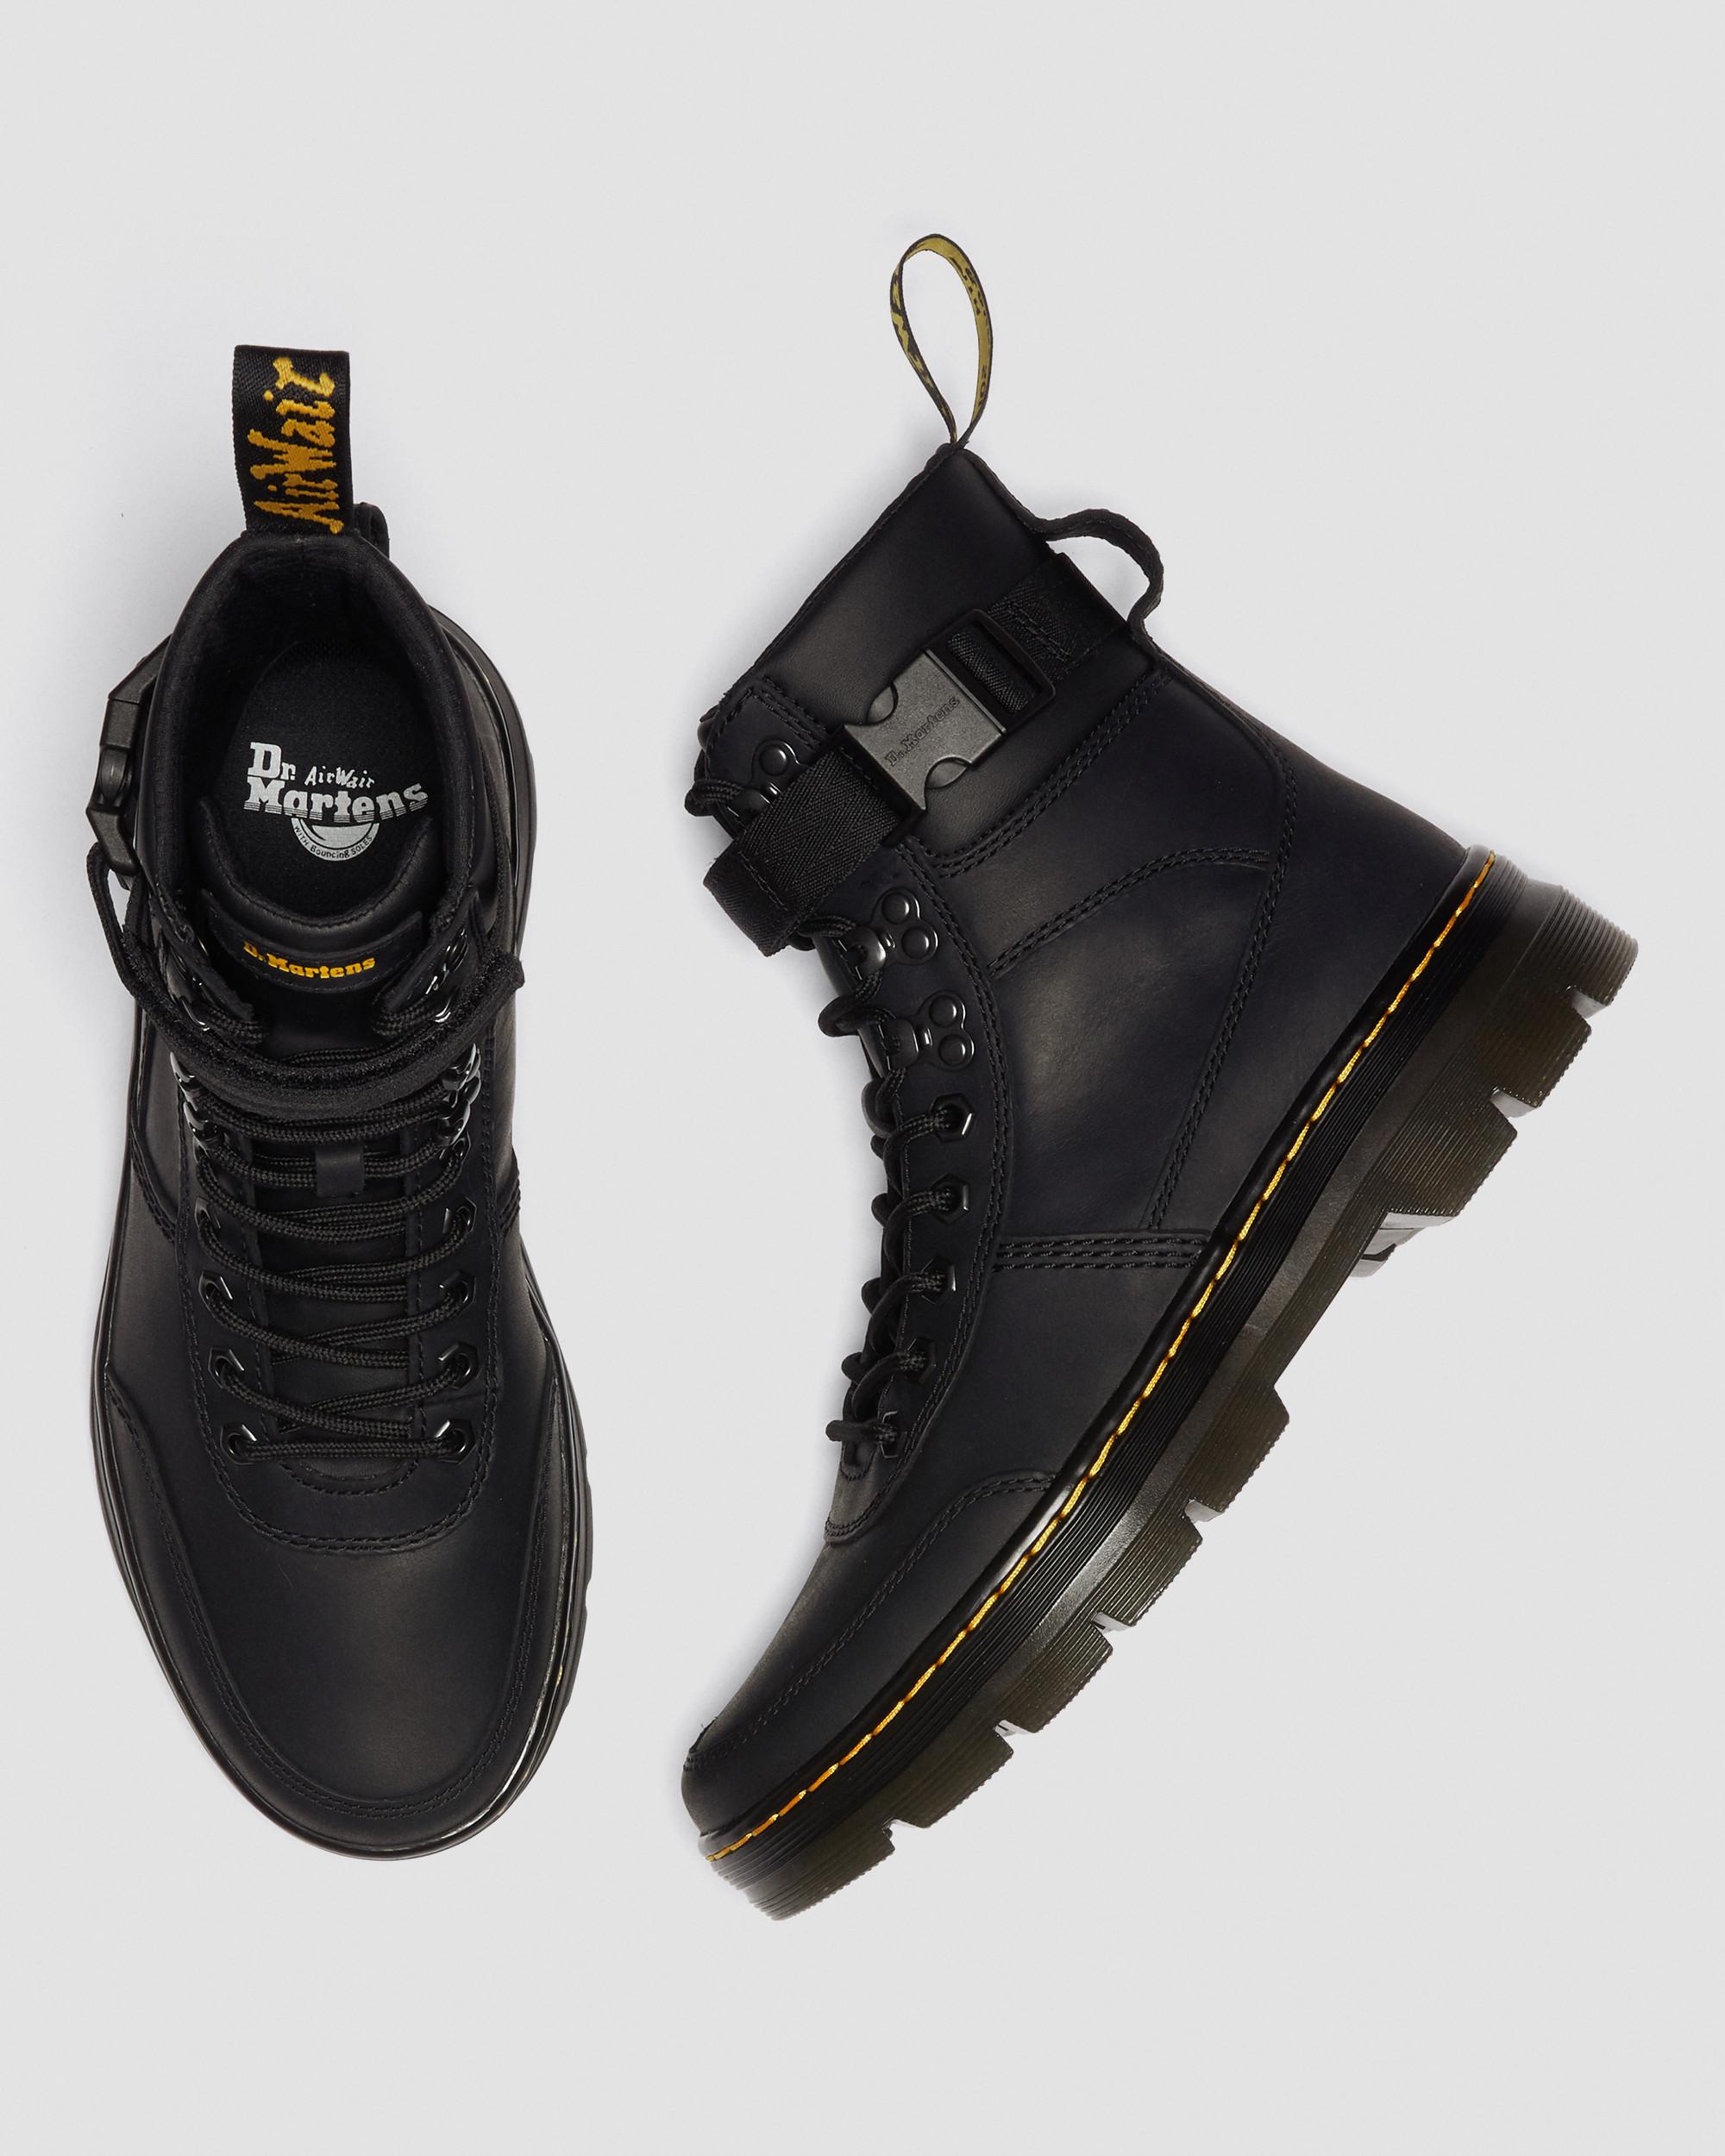 Combs Tech II Wyoming Leather Utility Boots in Black